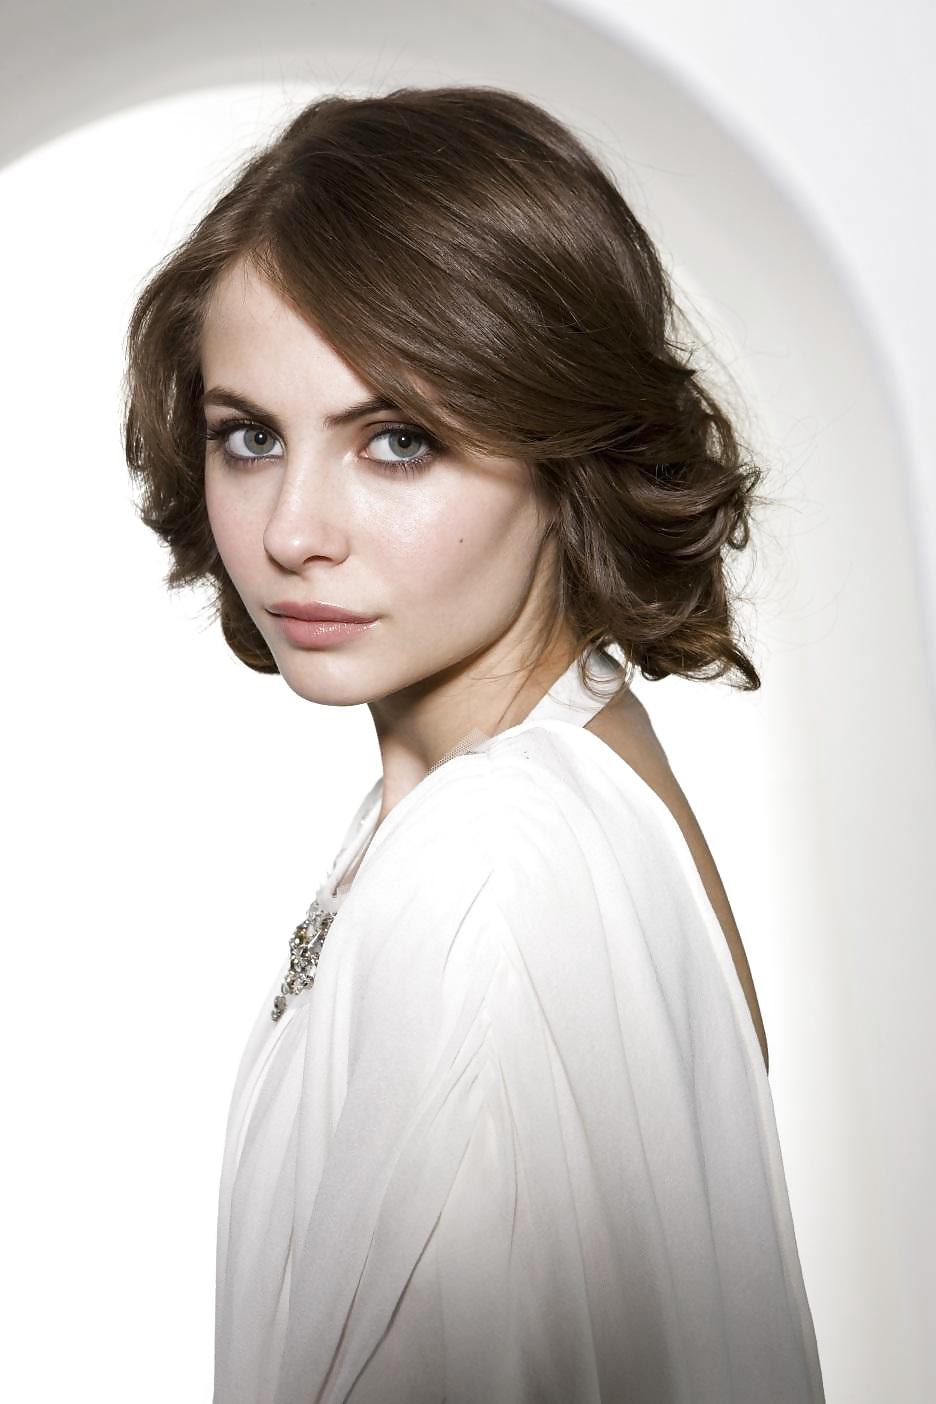 Willa holland (Hottest Young Celebrity) for fan :)  #15420203